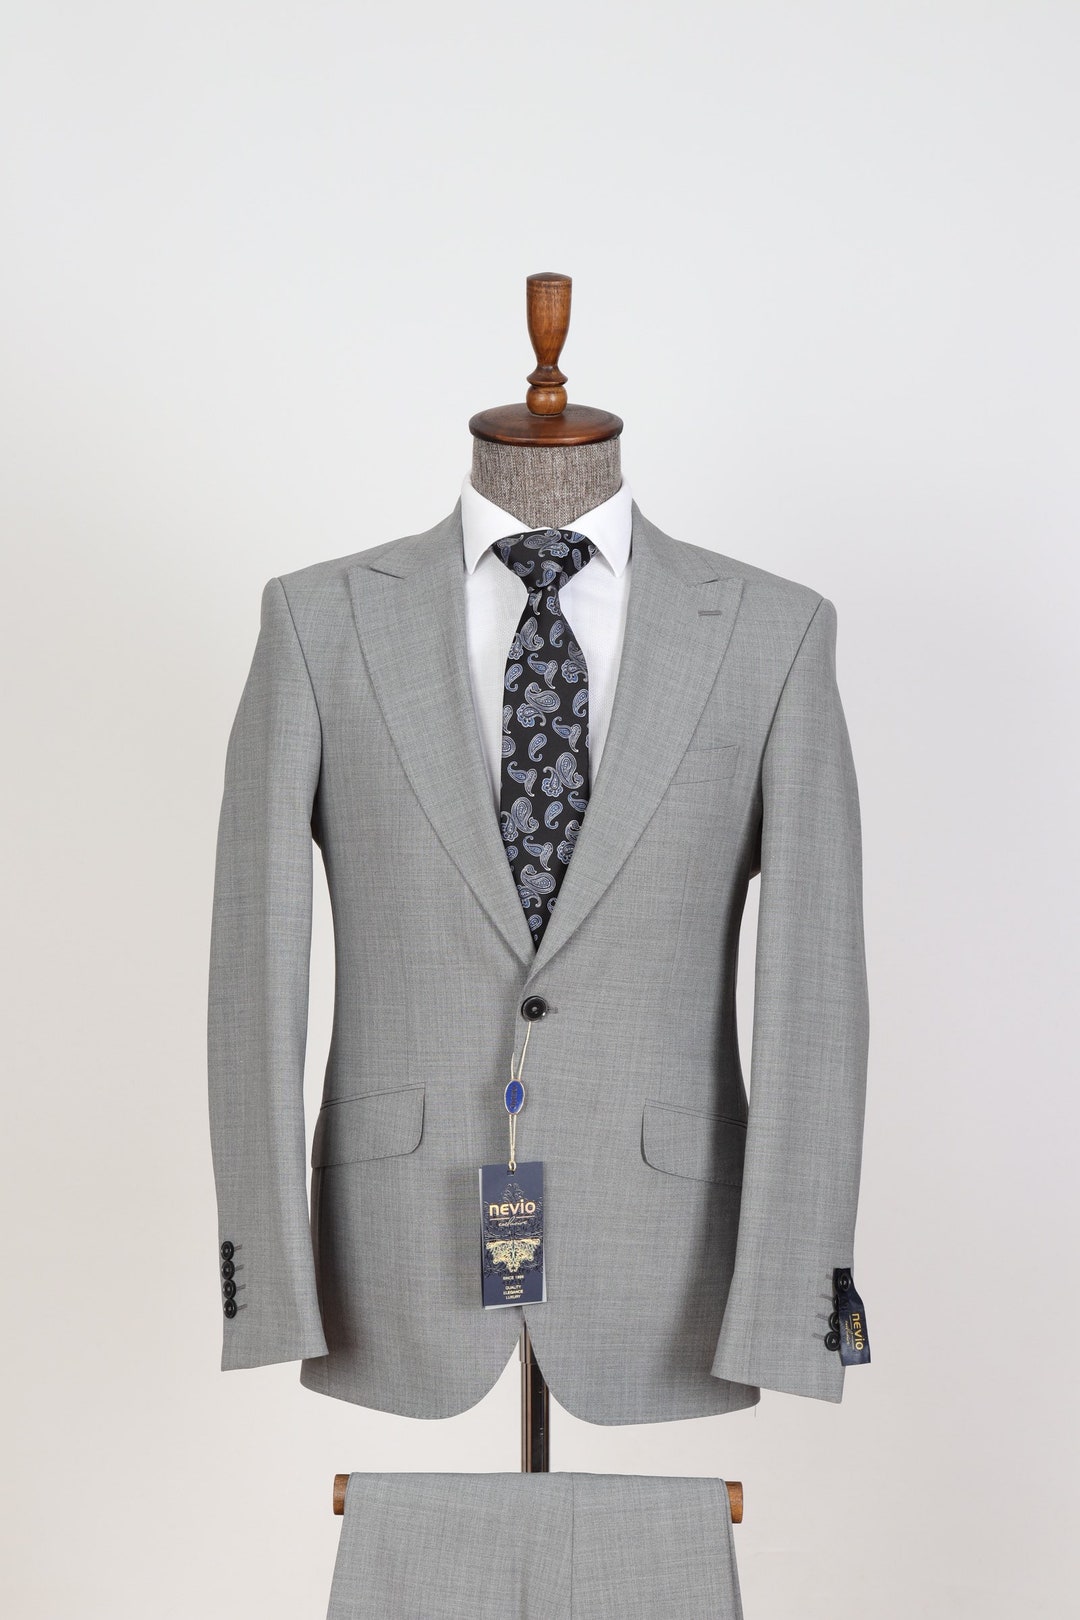 Classic 180s Super Gray Woven Wool Men's Suit Perfect for Business - Etsy